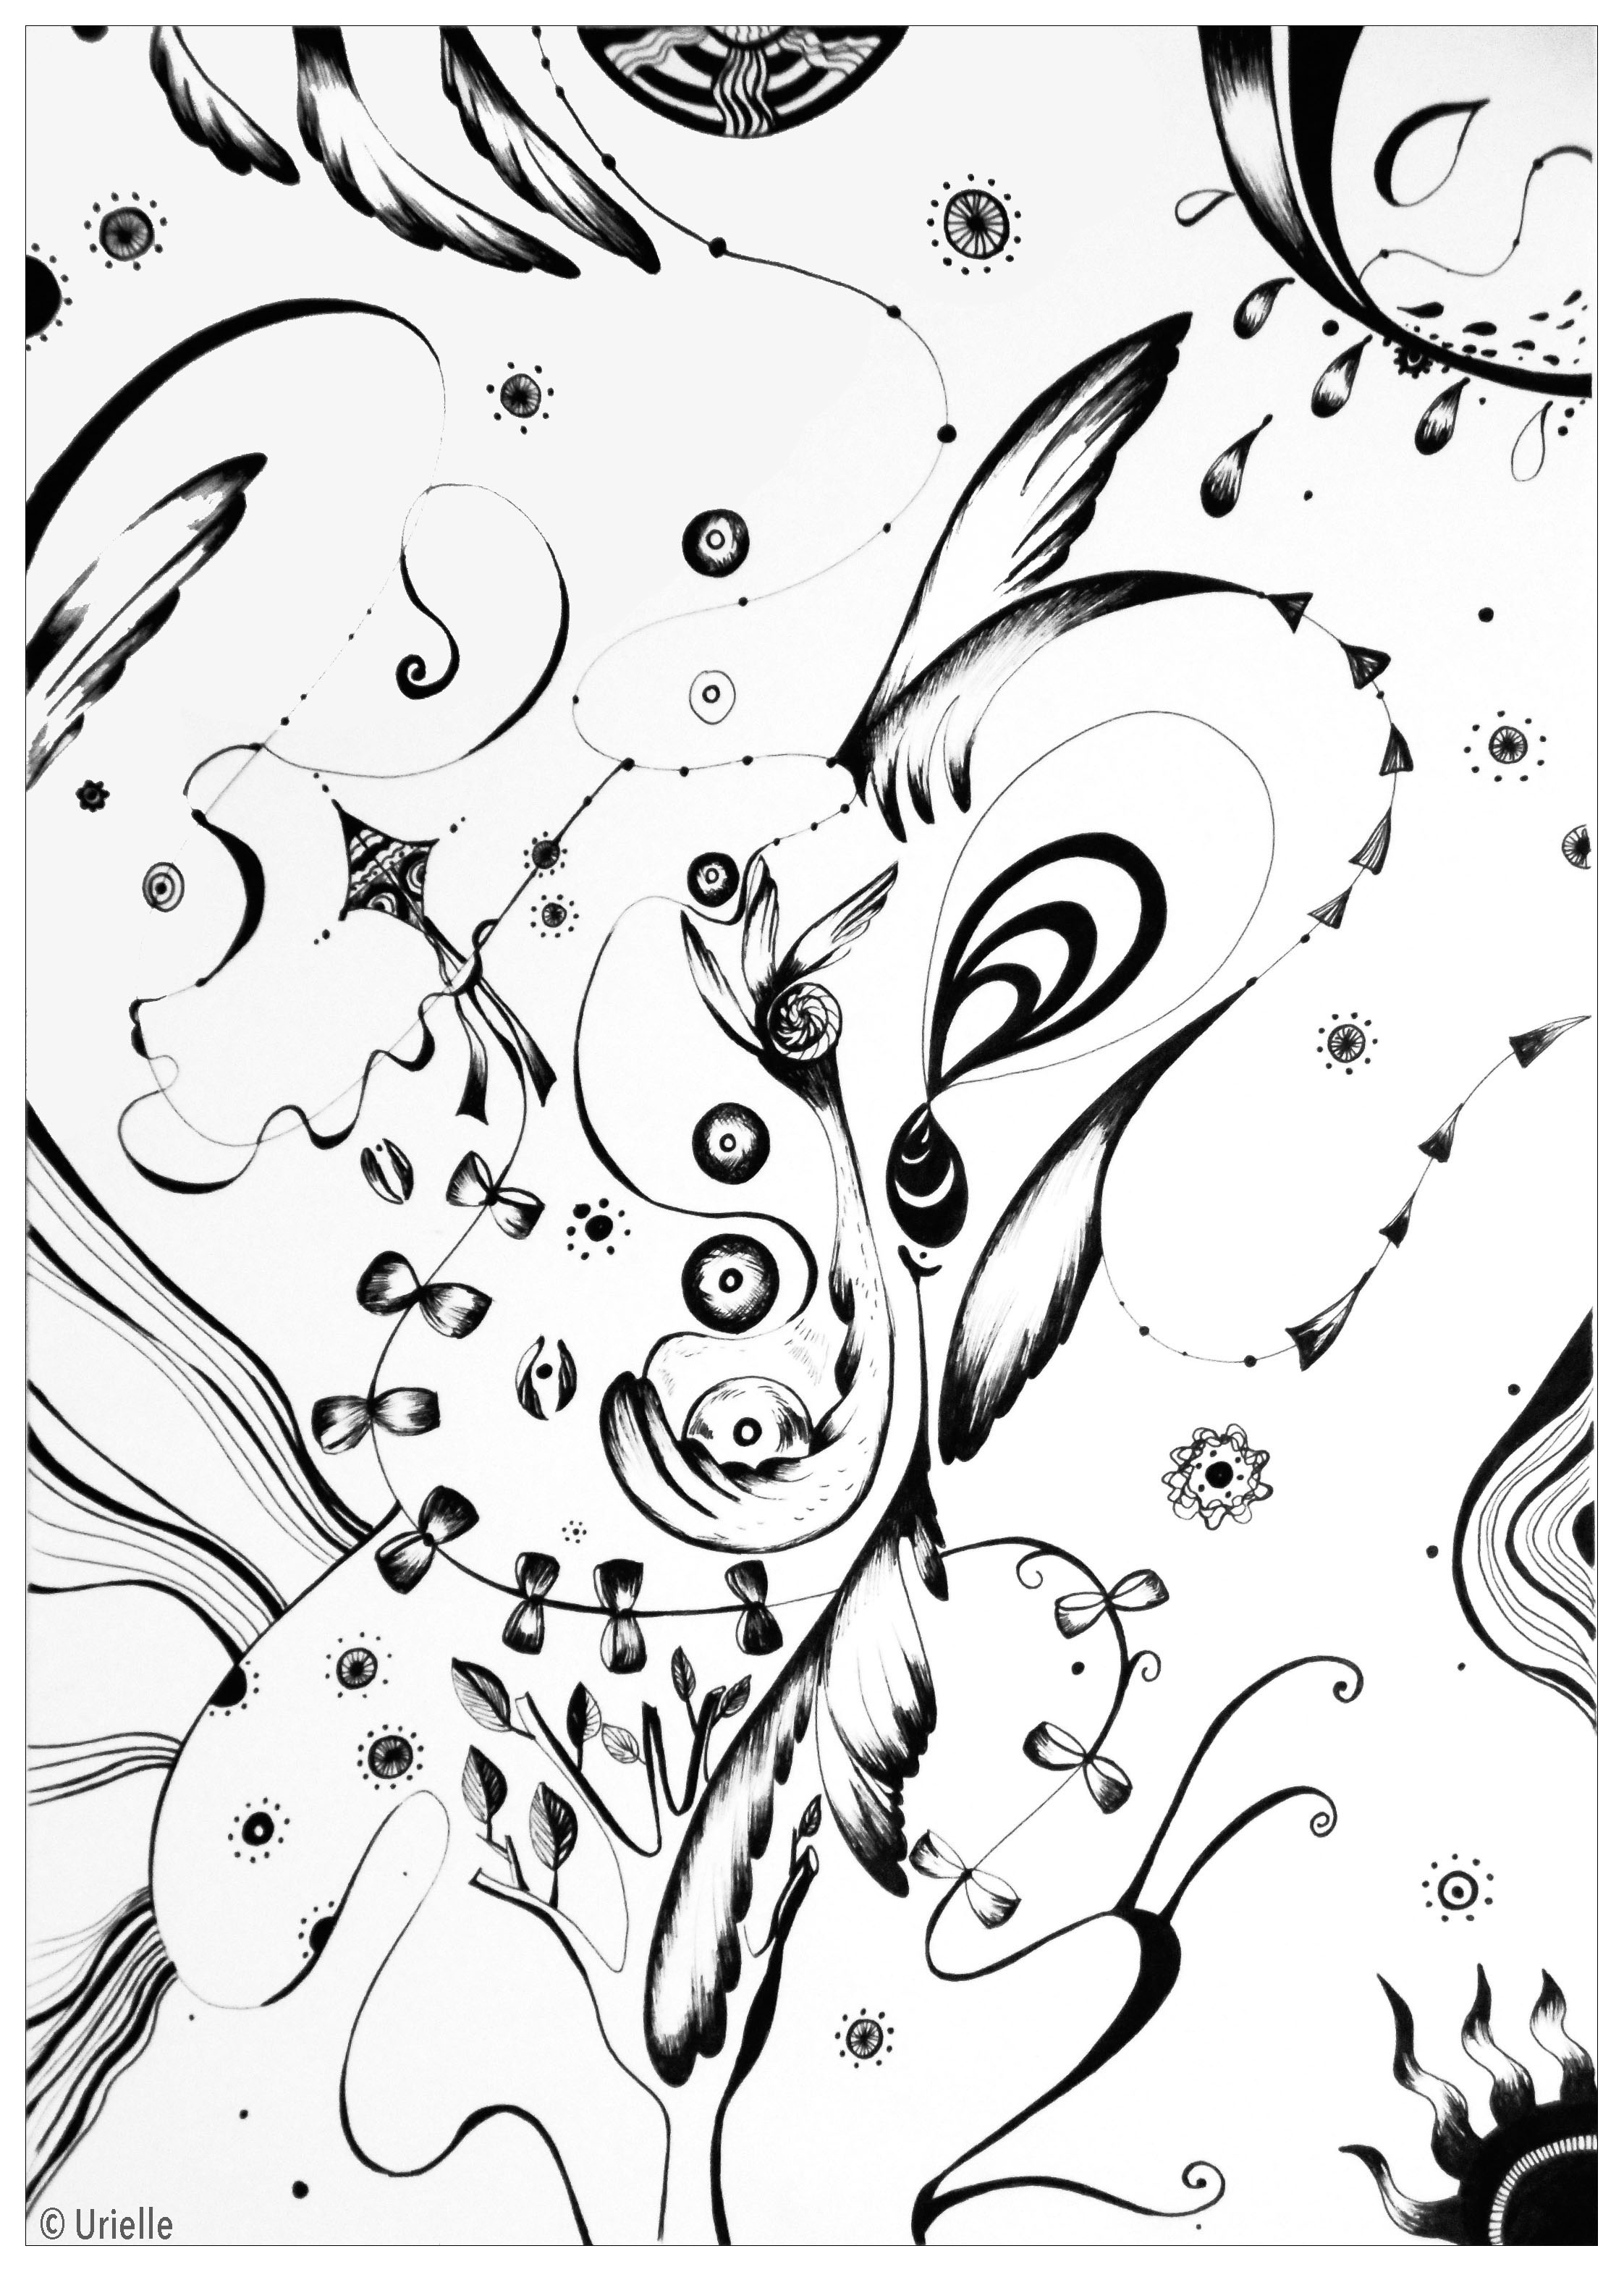 'Angels' : Abstract coloring page, do you see the angel wings ?, Artist : Urielle